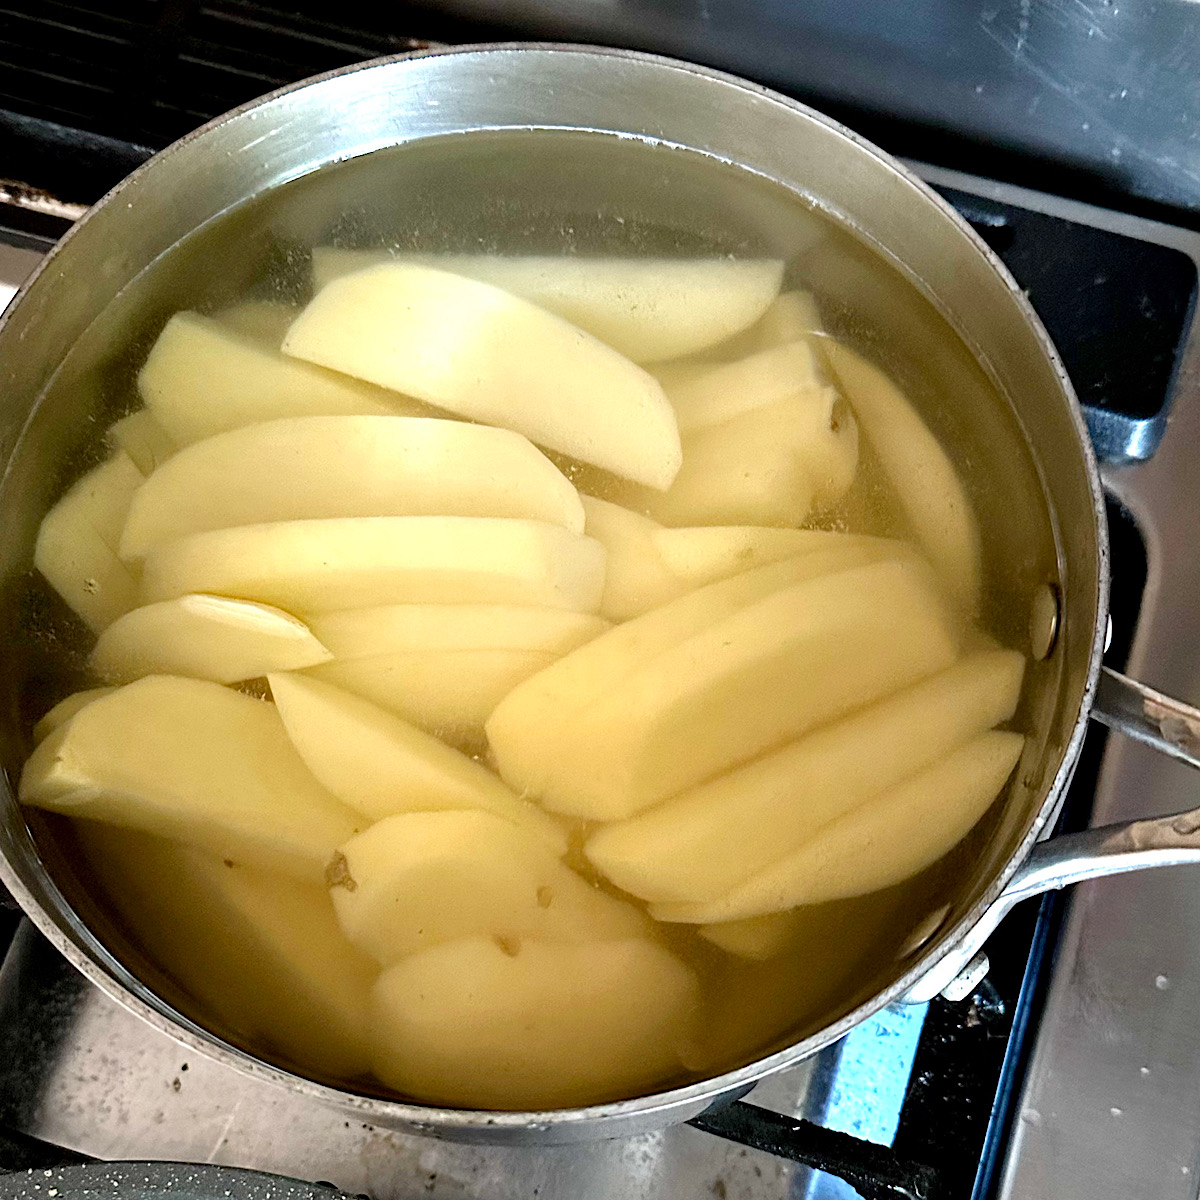 Potato strips cooking in a pot of water